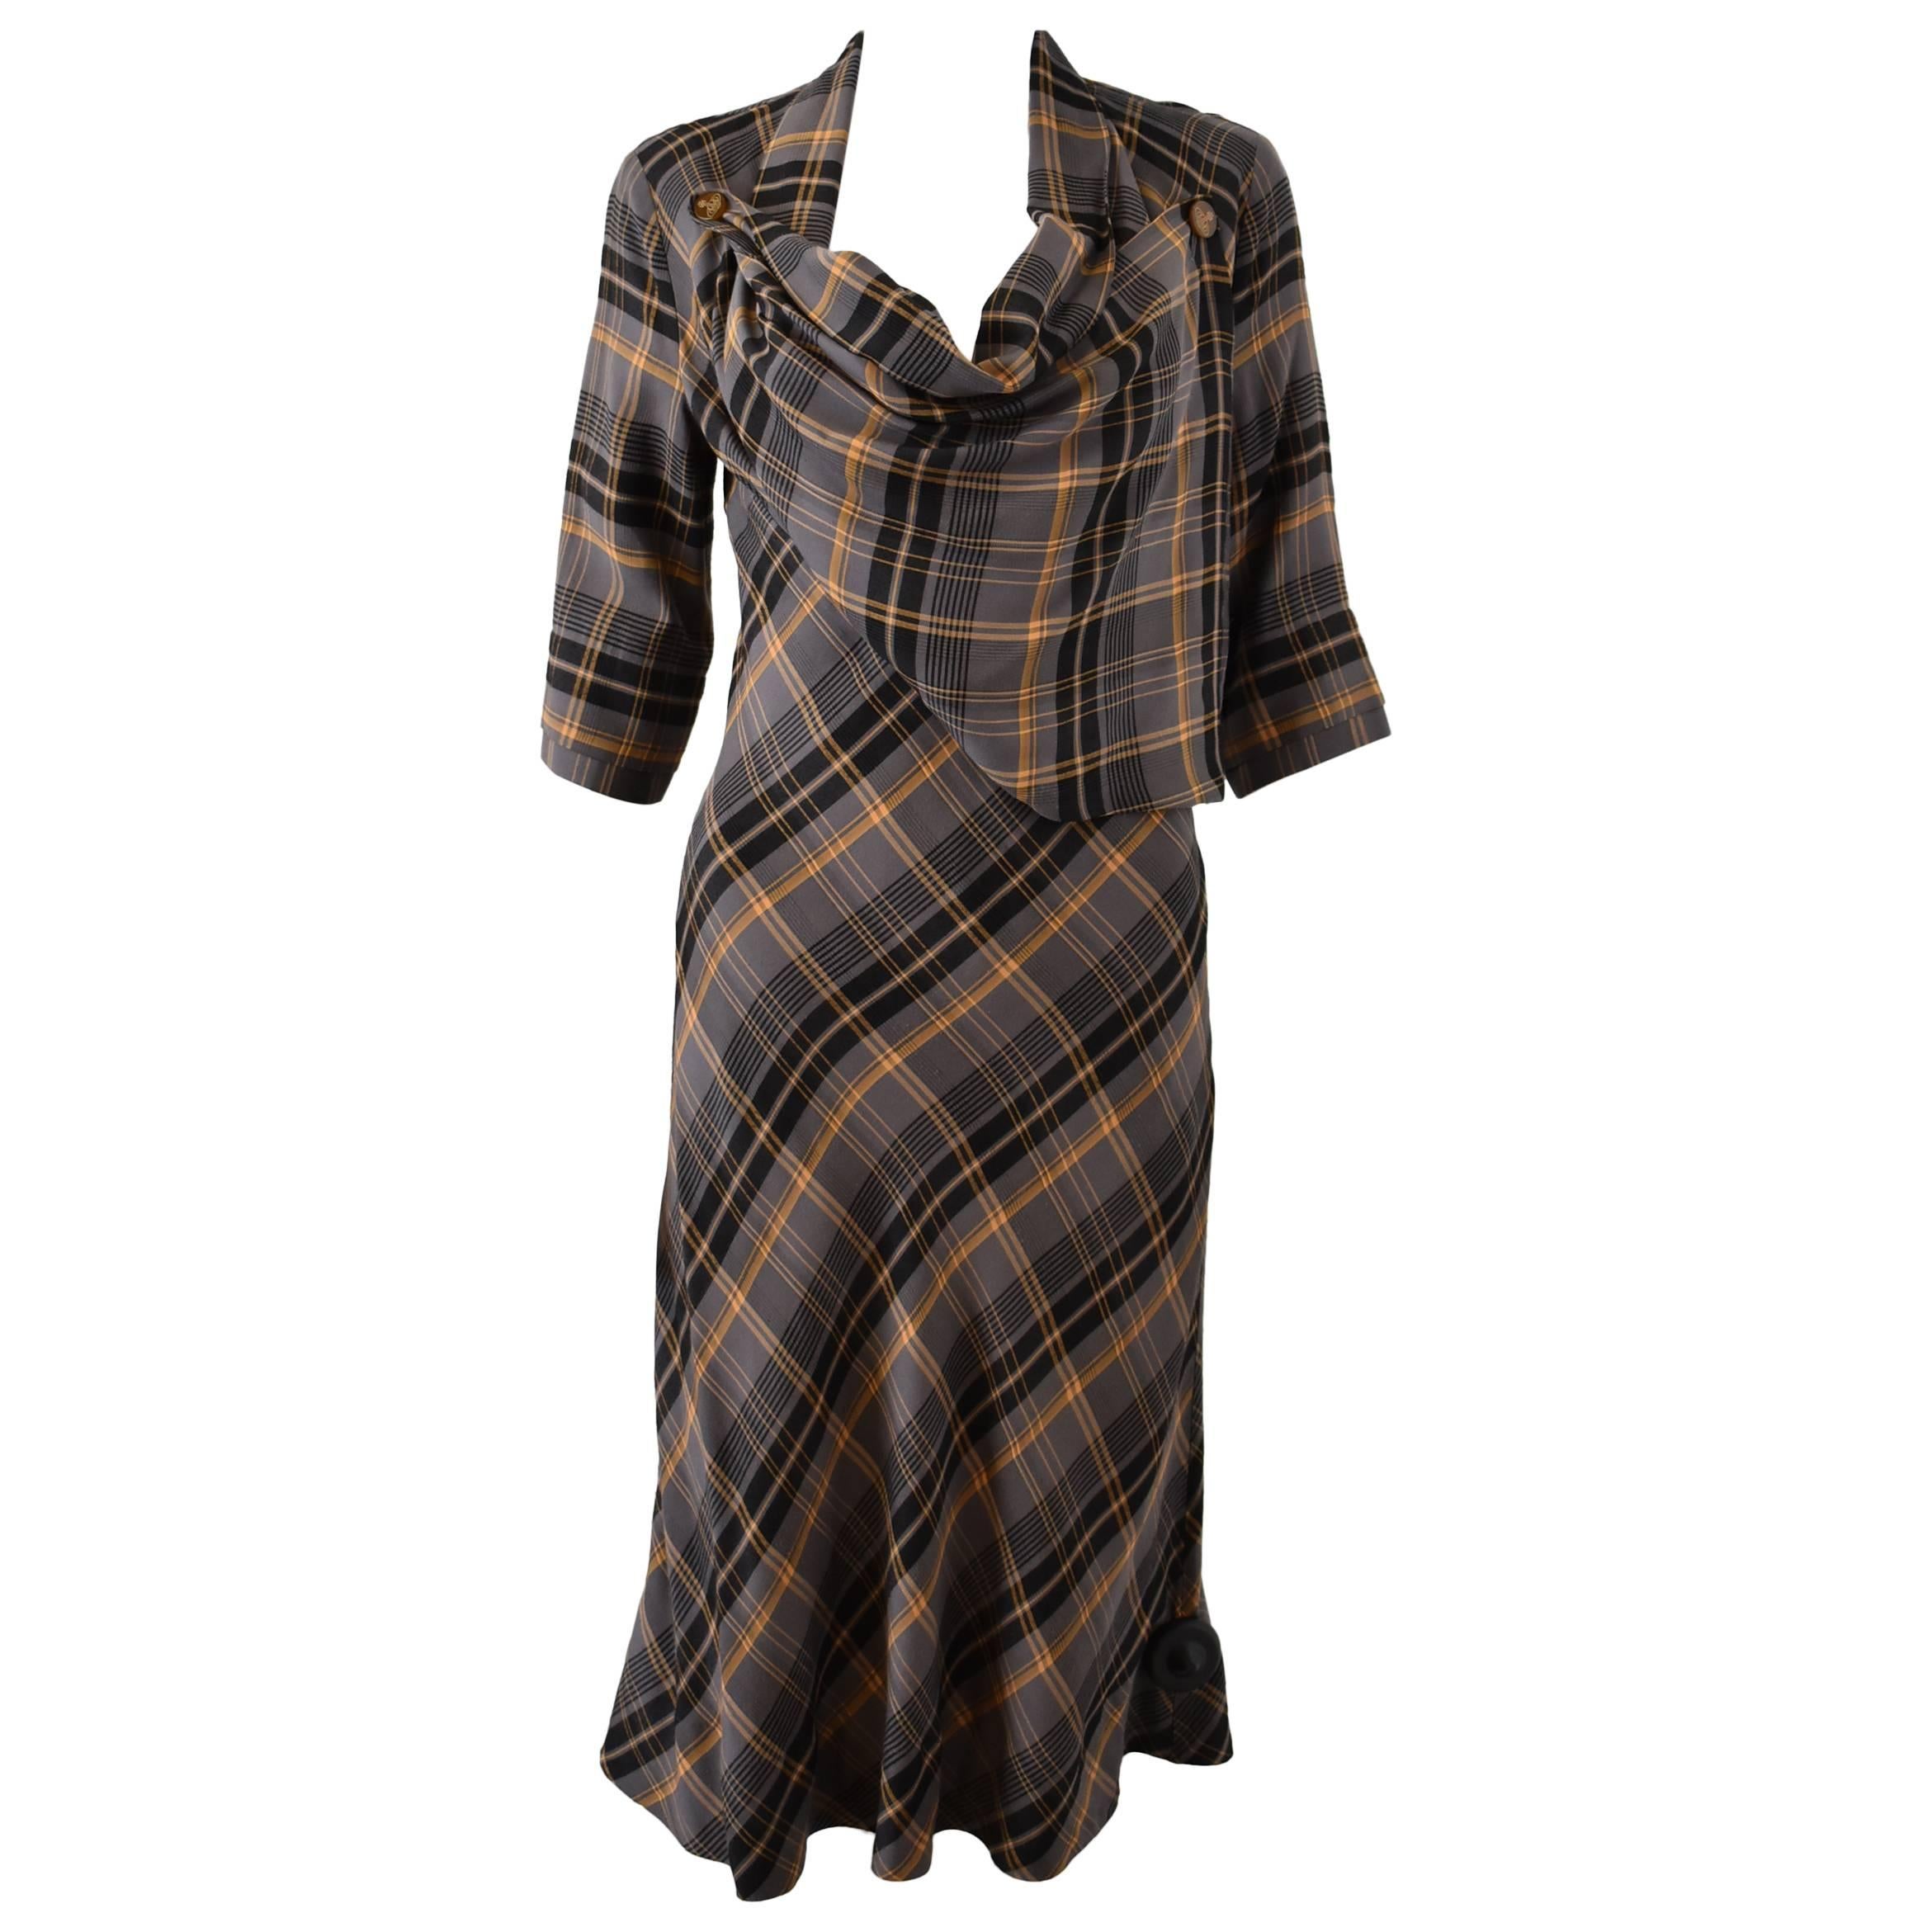 Vivienne Westwood Red Label Grey Tartan Check Dress with Cowl Neck Bib Front For Sale